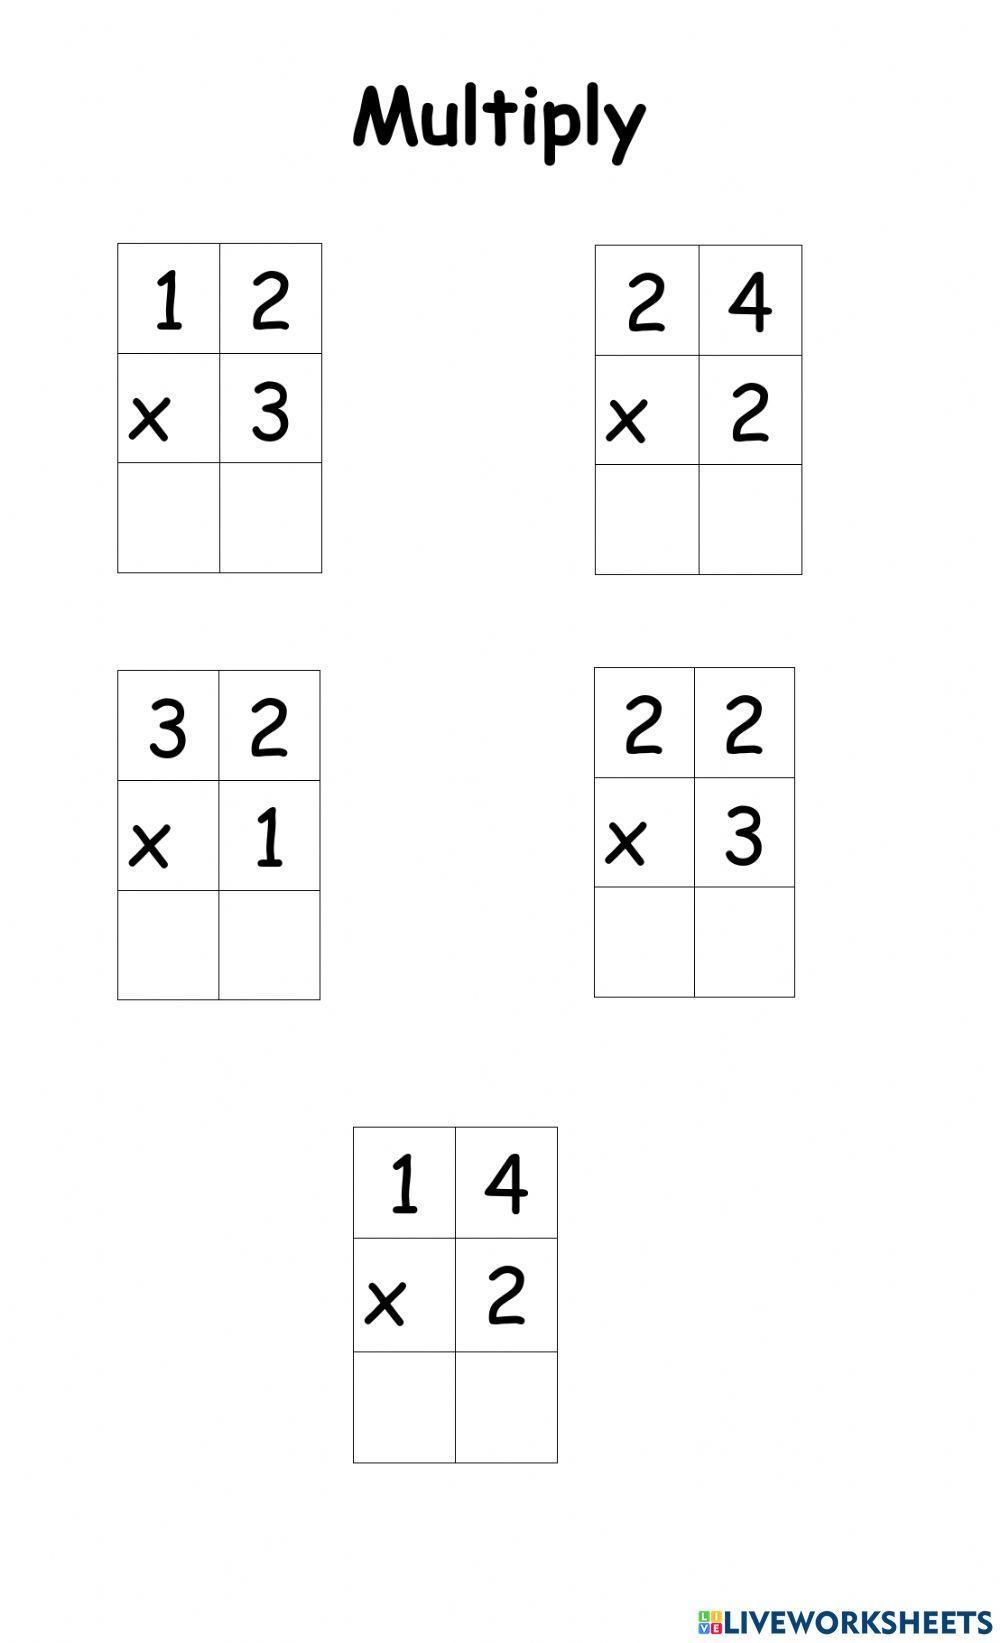 Multiplication without regrouping